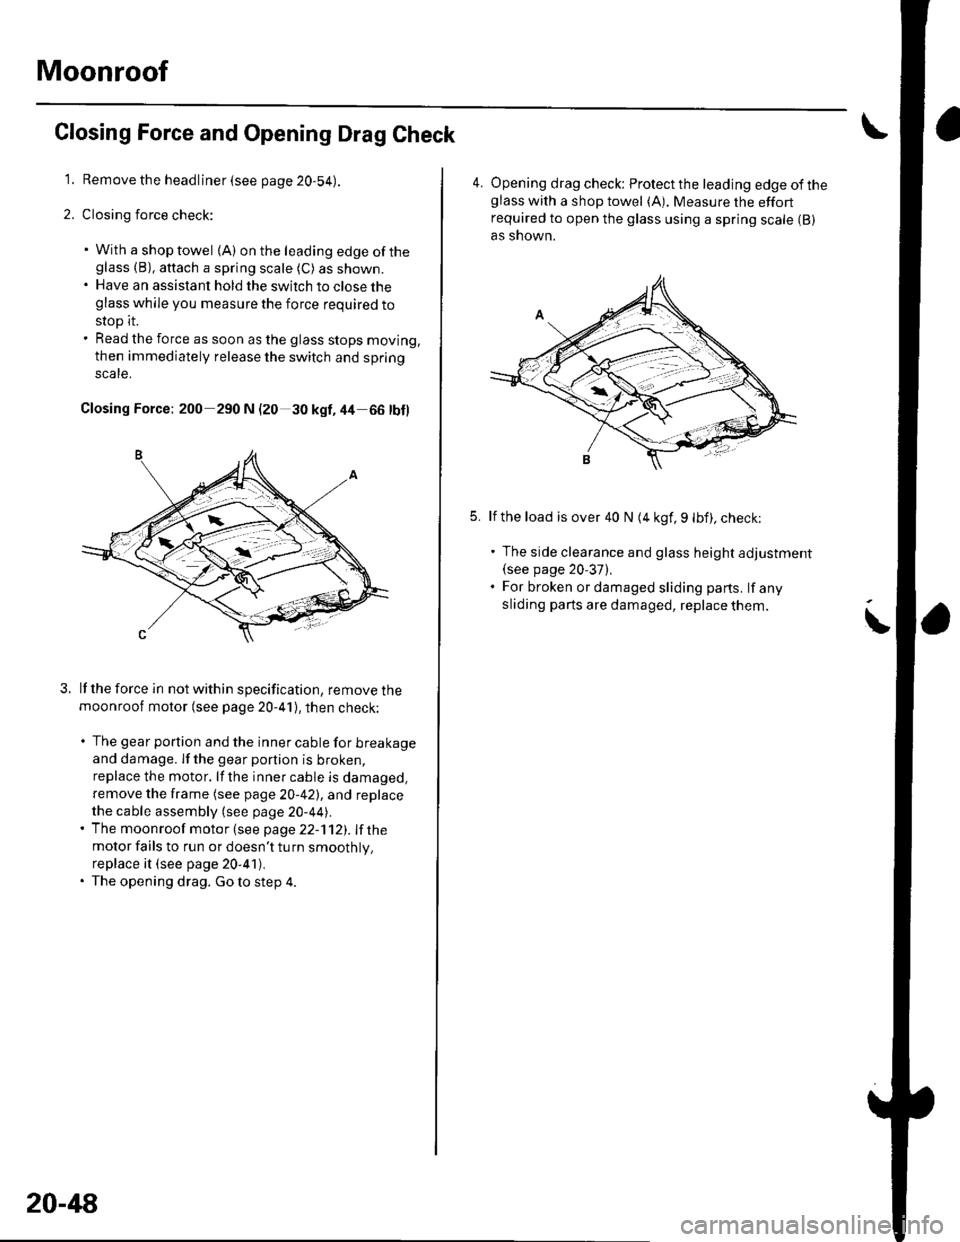 HONDA CIVIC 2003 7.G Workshop Manual Moonroof
\
Closing Force and Opening Drag Check
1. Remove the headliner (see page 20-54).
2. Closing force check:
. With a shop towel {A) on the leading edge of theglass (B), aftach a spring scale (C)